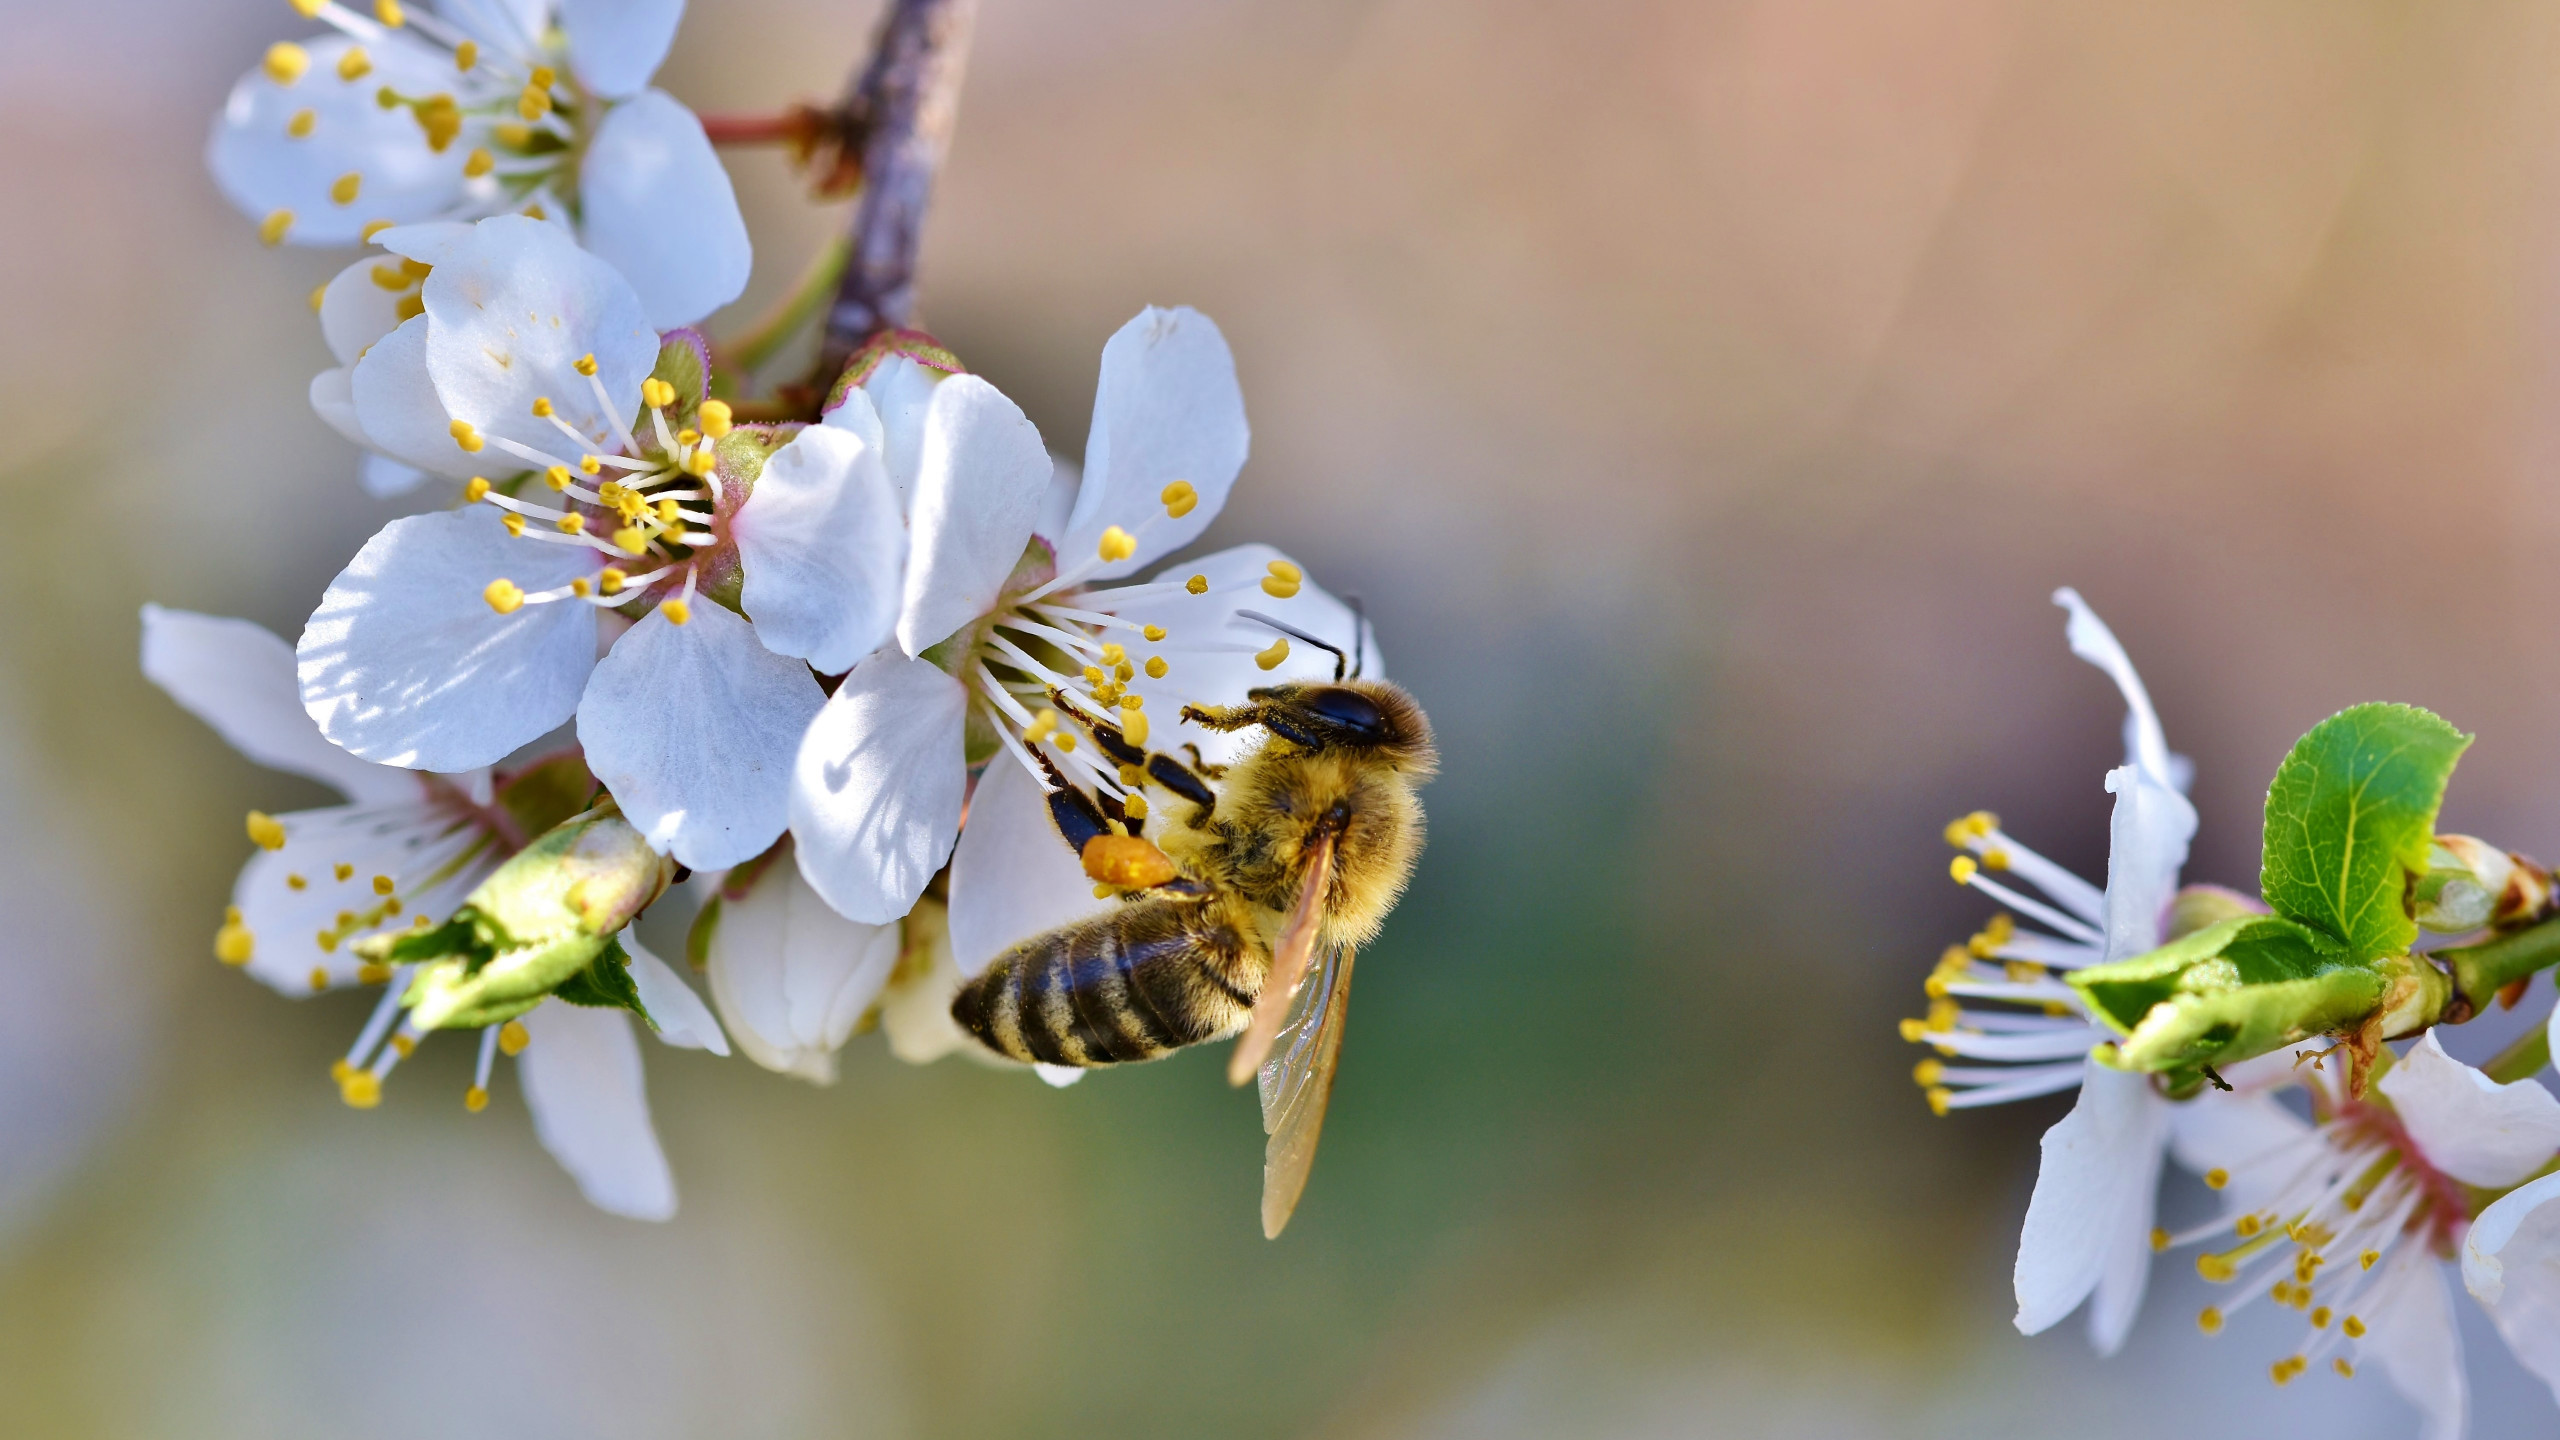 Download wallpaper: Spring, bee, blossoms, flower 2560x1440